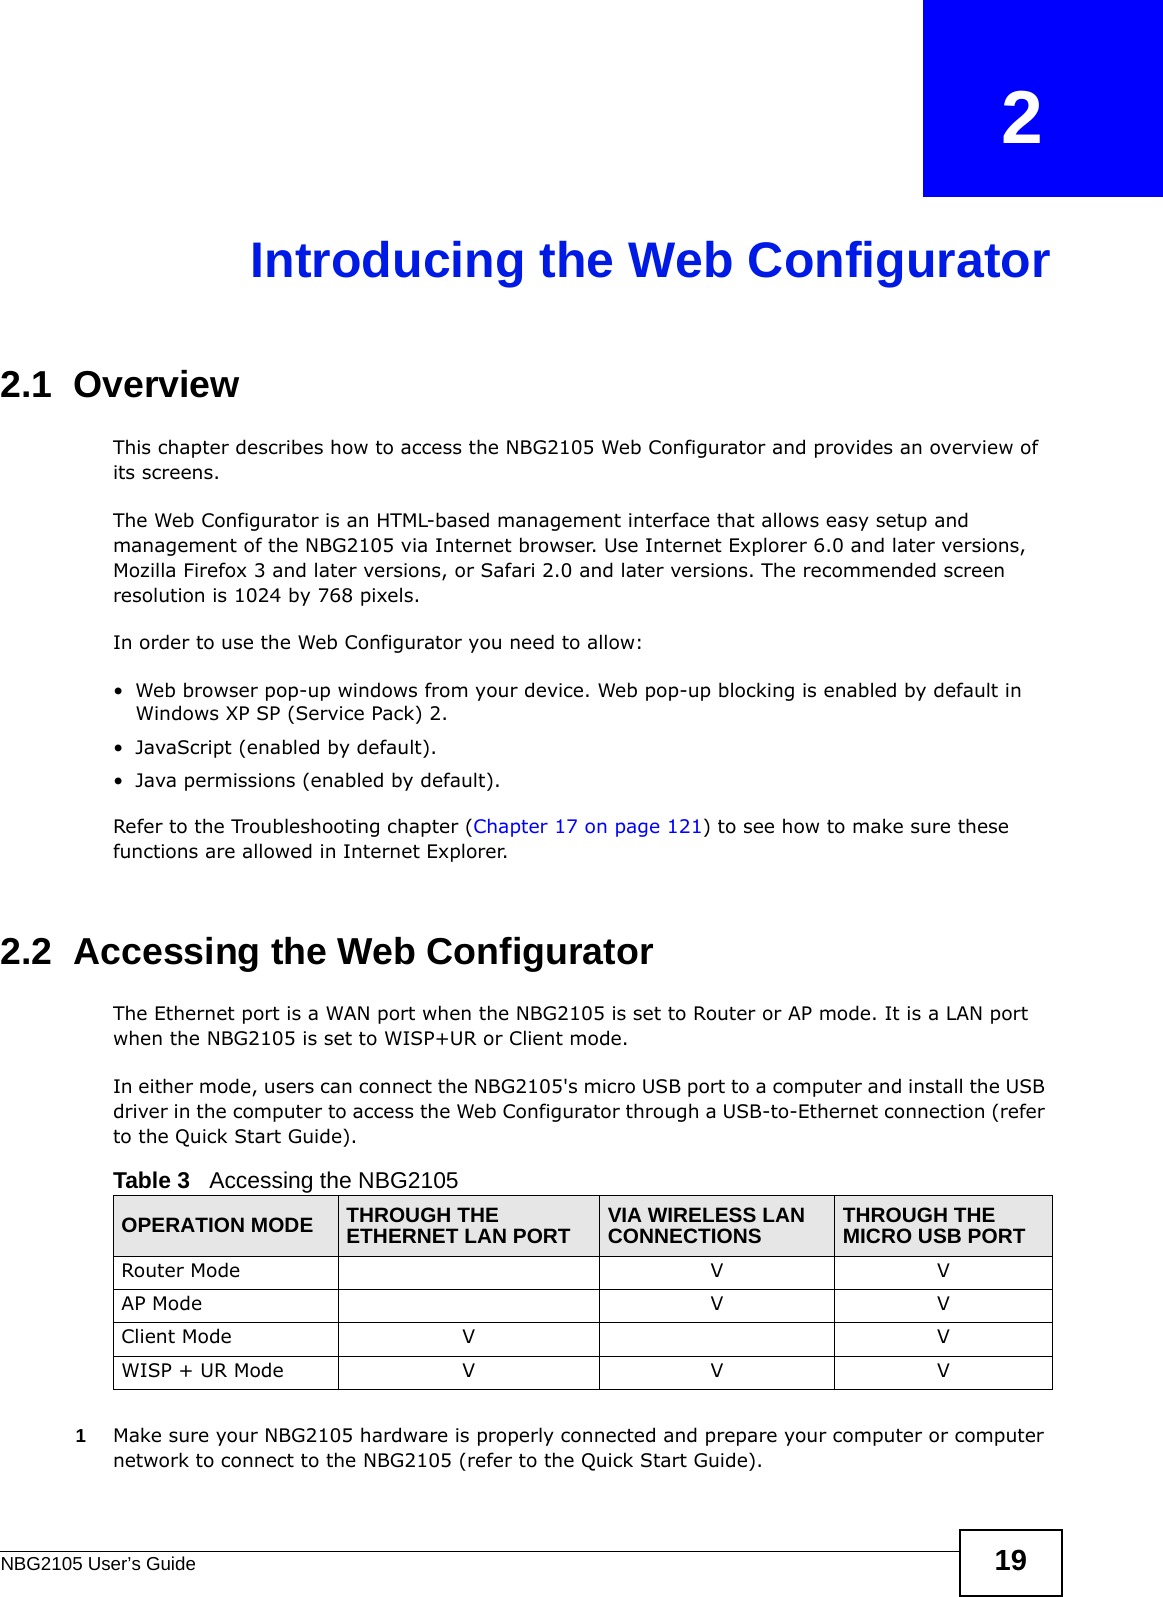 NBG2105 User’s Guide 19CHAPTER   2Introducing the Web Configurator2.1  OverviewThis chapter describes how to access the NBG2105 Web Configurator and provides an overview of its screens.The Web Configurator is an HTML-based management interface that allows easy setup and management of the NBG2105 via Internet browser. Use Internet Explorer 6.0 and later versions, Mozilla Firefox 3 and later versions, or Safari 2.0 and later versions. The recommended screen resolution is 1024 by 768 pixels.In order to use the Web Configurator you need to allow:• Web browser pop-up windows from your device. Web pop-up blocking is enabled by default in Windows XP SP (Service Pack) 2.• JavaScript (enabled by default).• Java permissions (enabled by default).Refer to the Troubleshooting chapter (Chapter 17 on page 121) to see how to make sure these functions are allowed in Internet Explorer.2.2  Accessing the Web ConfiguratorThe Ethernet port is a WAN port when the NBG2105 is set to Router or AP mode. It is a LAN port when the NBG2105 is set to WISP+UR or Client mode.In either mode, users can connect the NBG2105&apos;s micro USB port to a computer and install the USB driver in the computer to access the Web Configurator through a USB-to-Ethernet connection (refer to the Quick Start Guide).1Make sure your NBG2105 hardware is properly connected and prepare your computer or computer network to connect to the NBG2105 (refer to the Quick Start Guide).Table 3   Accessing the NBG2105OPERATION MODE THROUGH THE ETHERNET LAN PORT VIA WIRELESS LAN CONNECTIONS THROUGH THE MICRO USB PORTRouter Mode V VAP Mode V VClient Mode V VWISP + UR Mode V V V